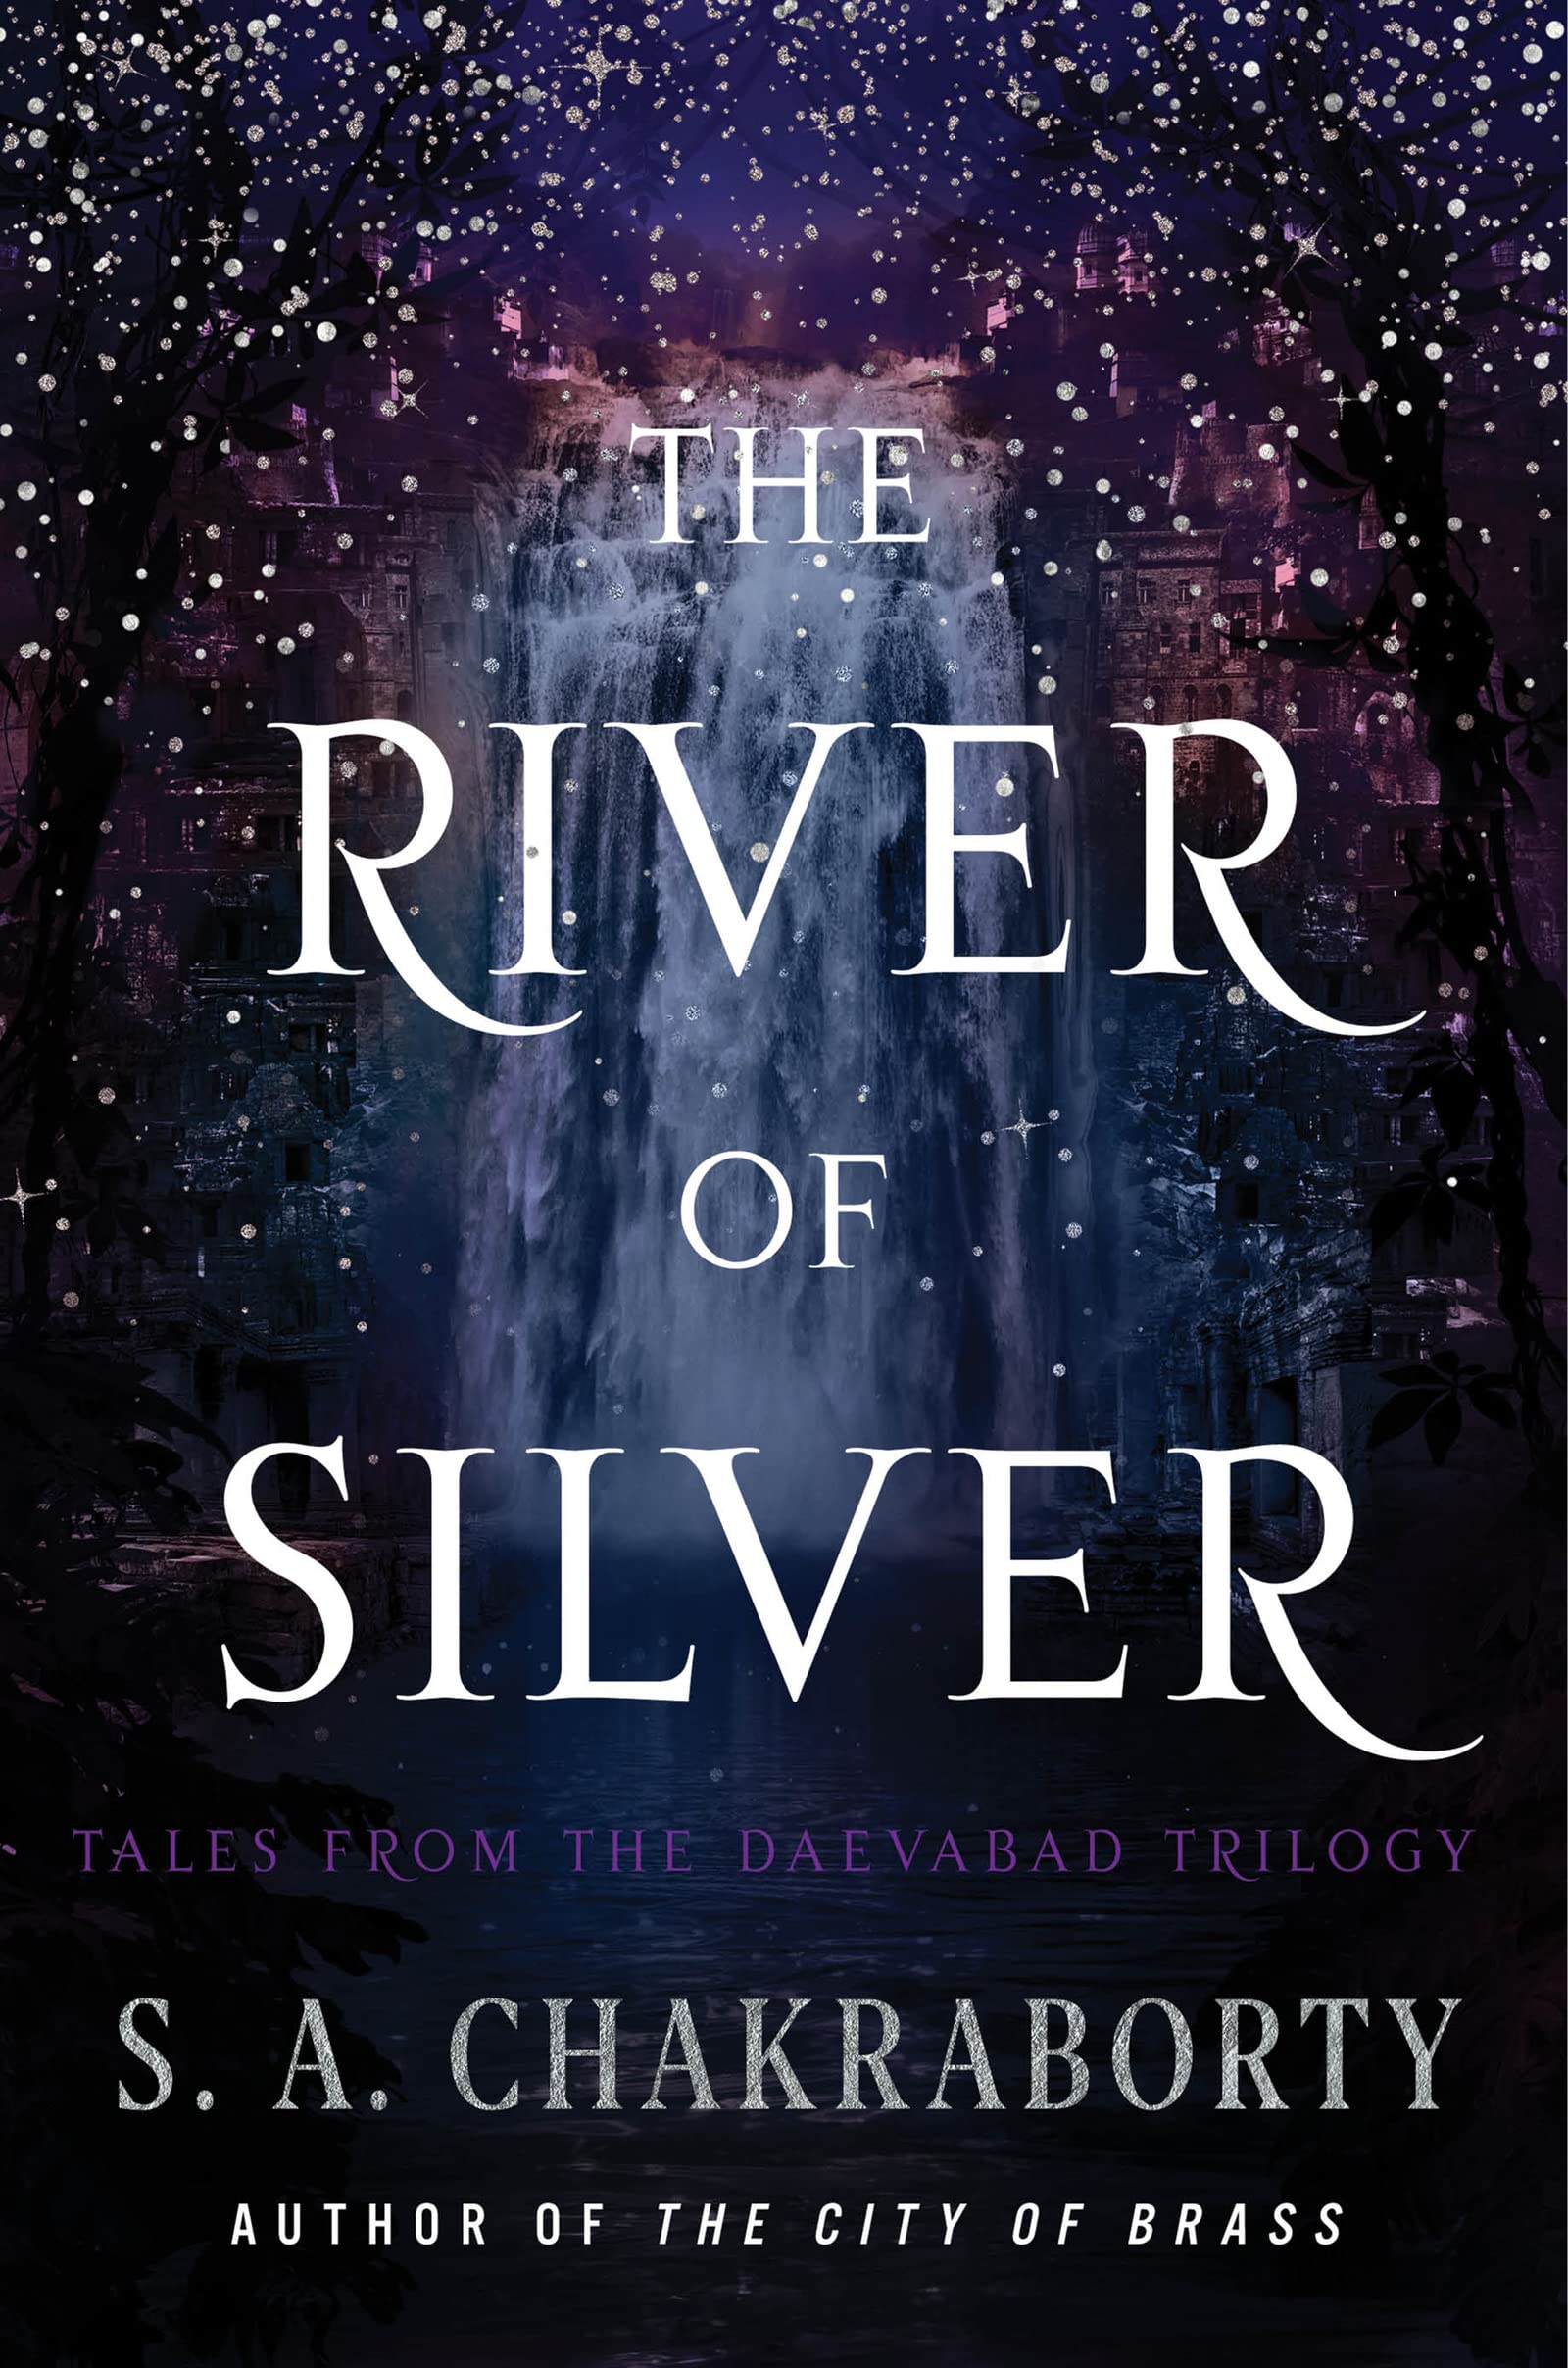 book cover for The River of Silver - a blue waterfall and stars on a black background, "The River of Silver" on top